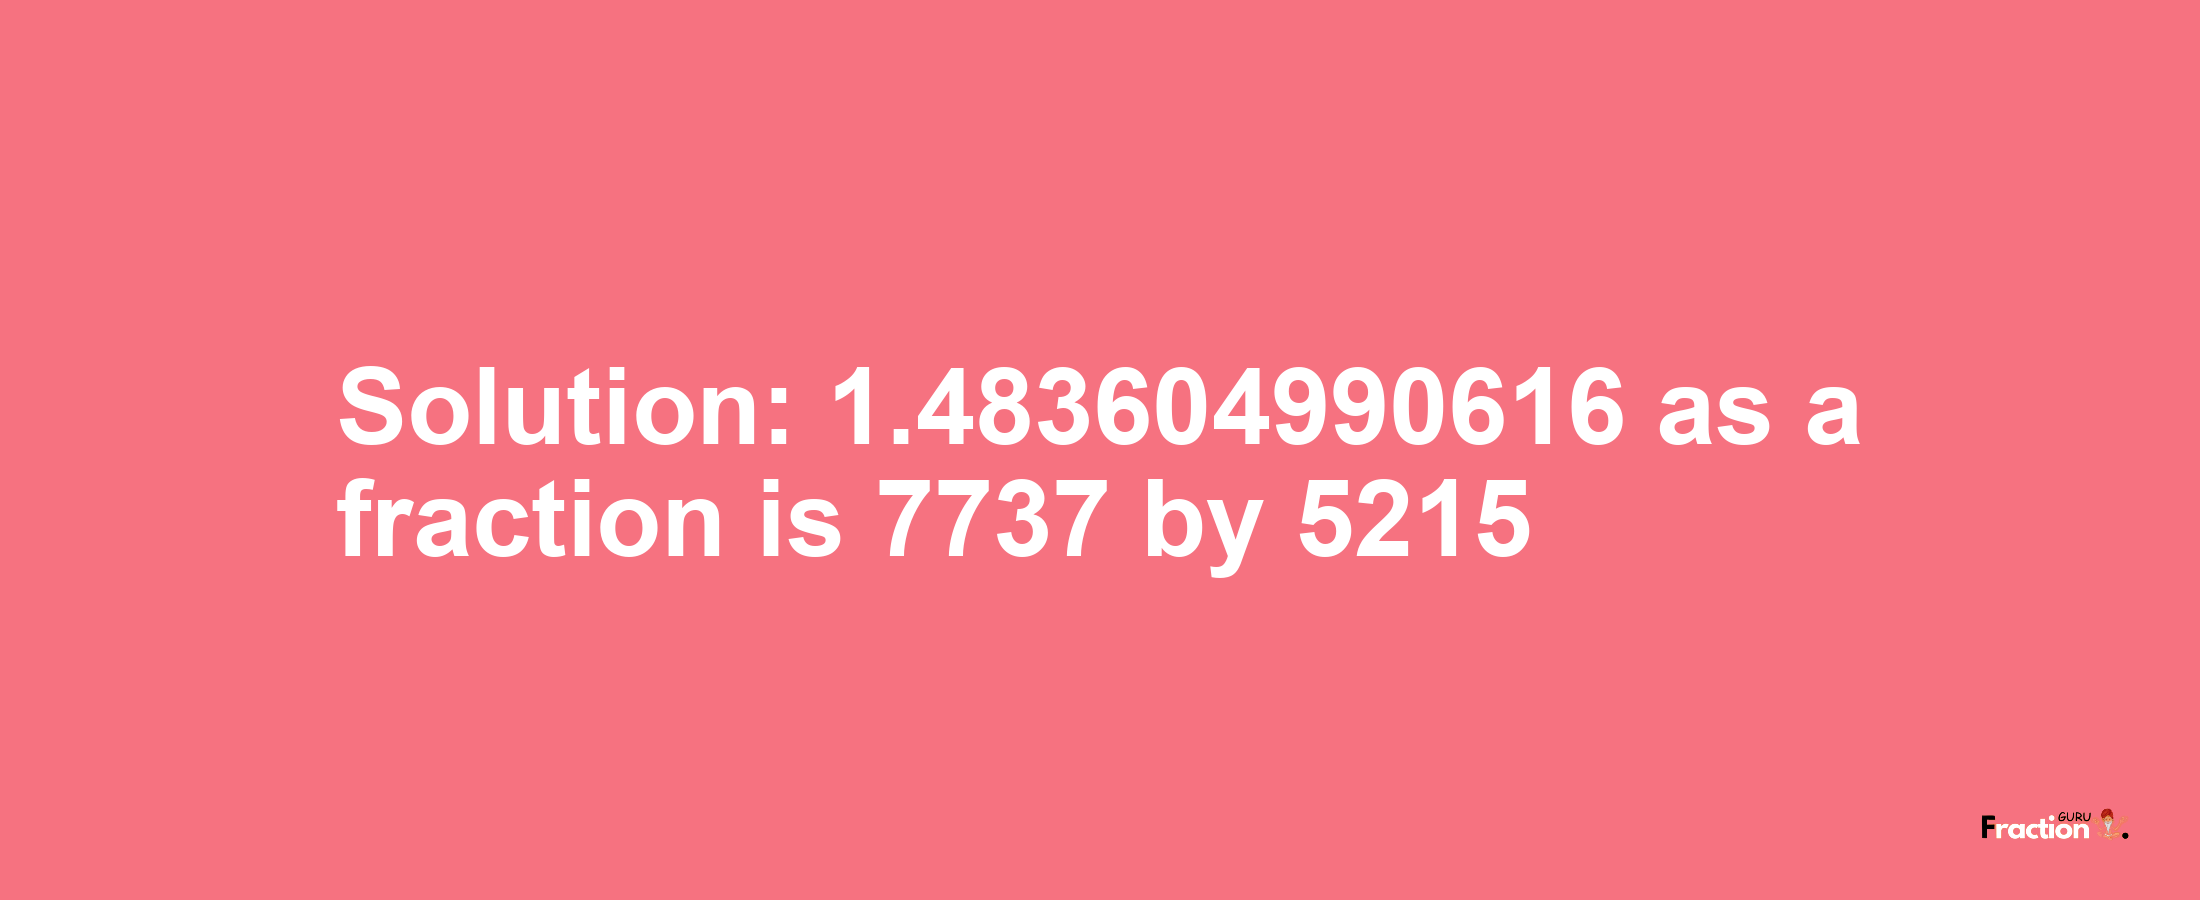 Solution:1.483604990616 as a fraction is 7737/5215